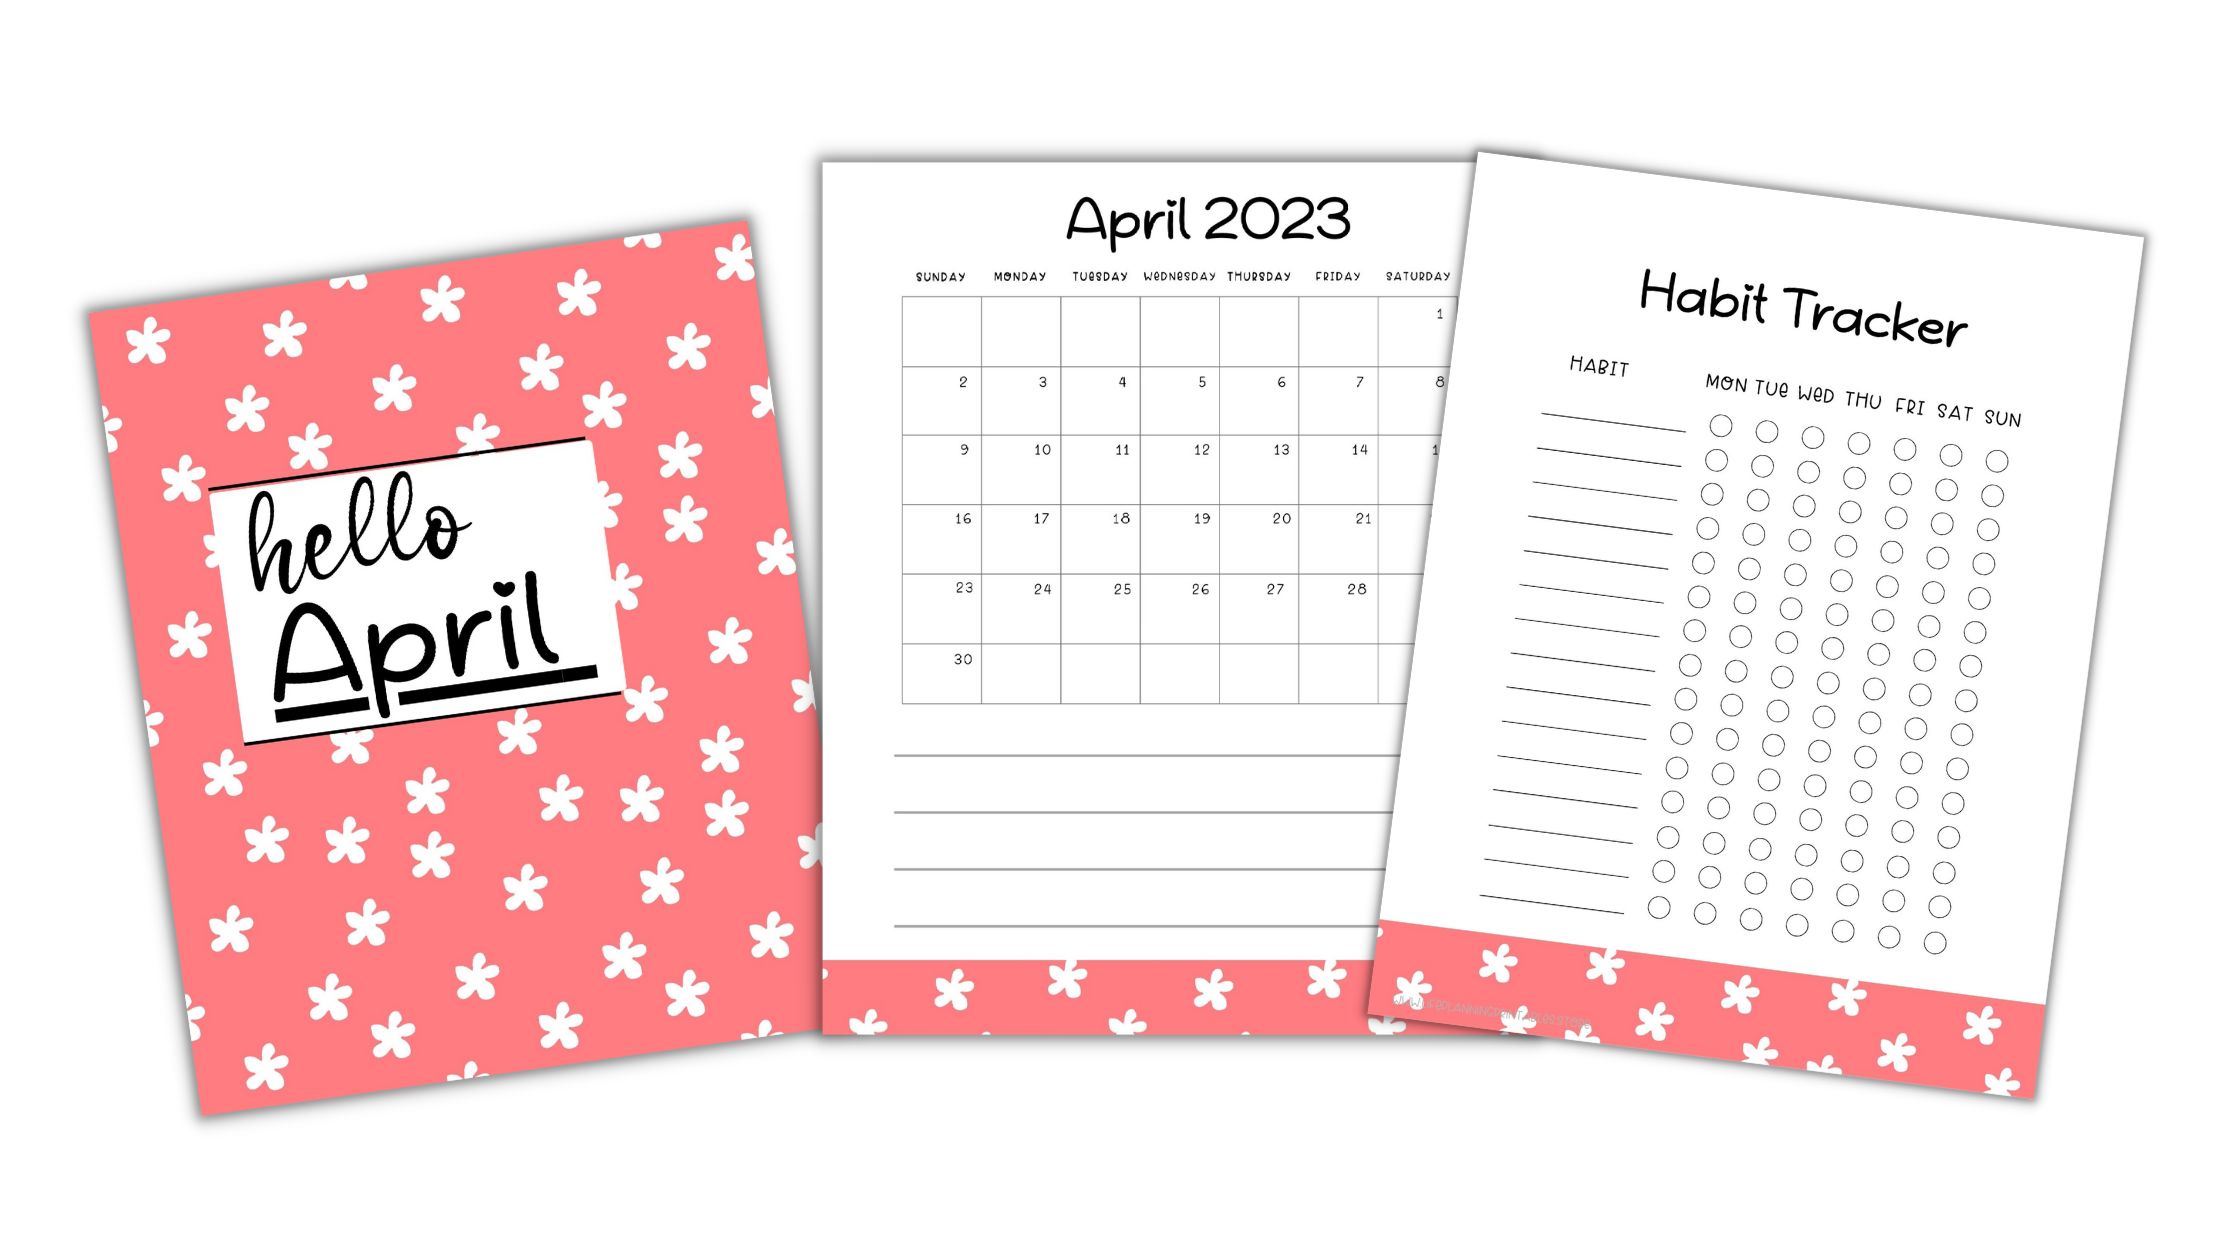 Looking for 2023 April Calendar And Planner Free Printables. Scroll down and you'll find April calendar printables for free.